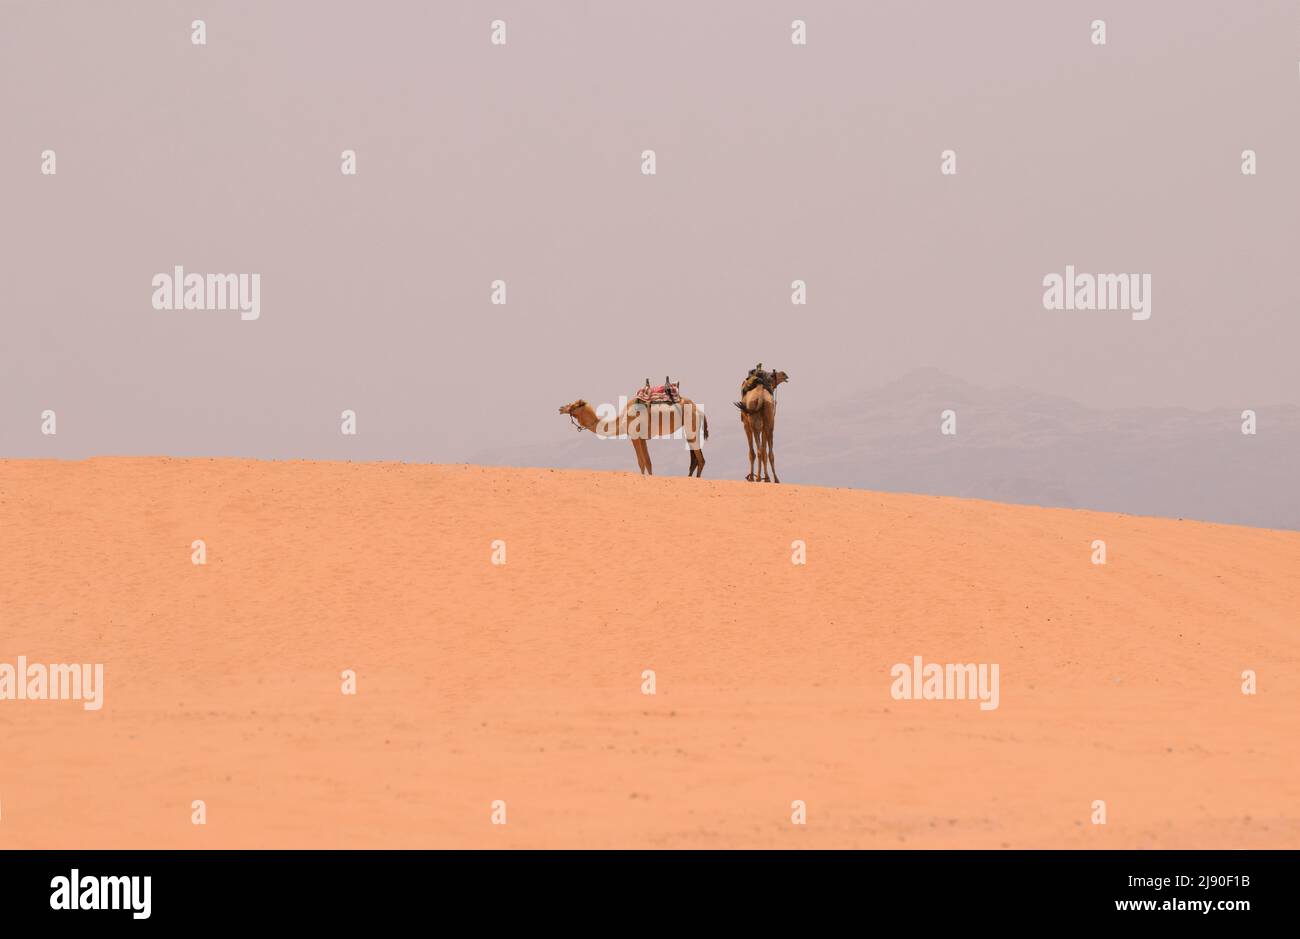 Two bedouin camels standing together on a sand dune in the desert Stock Photo